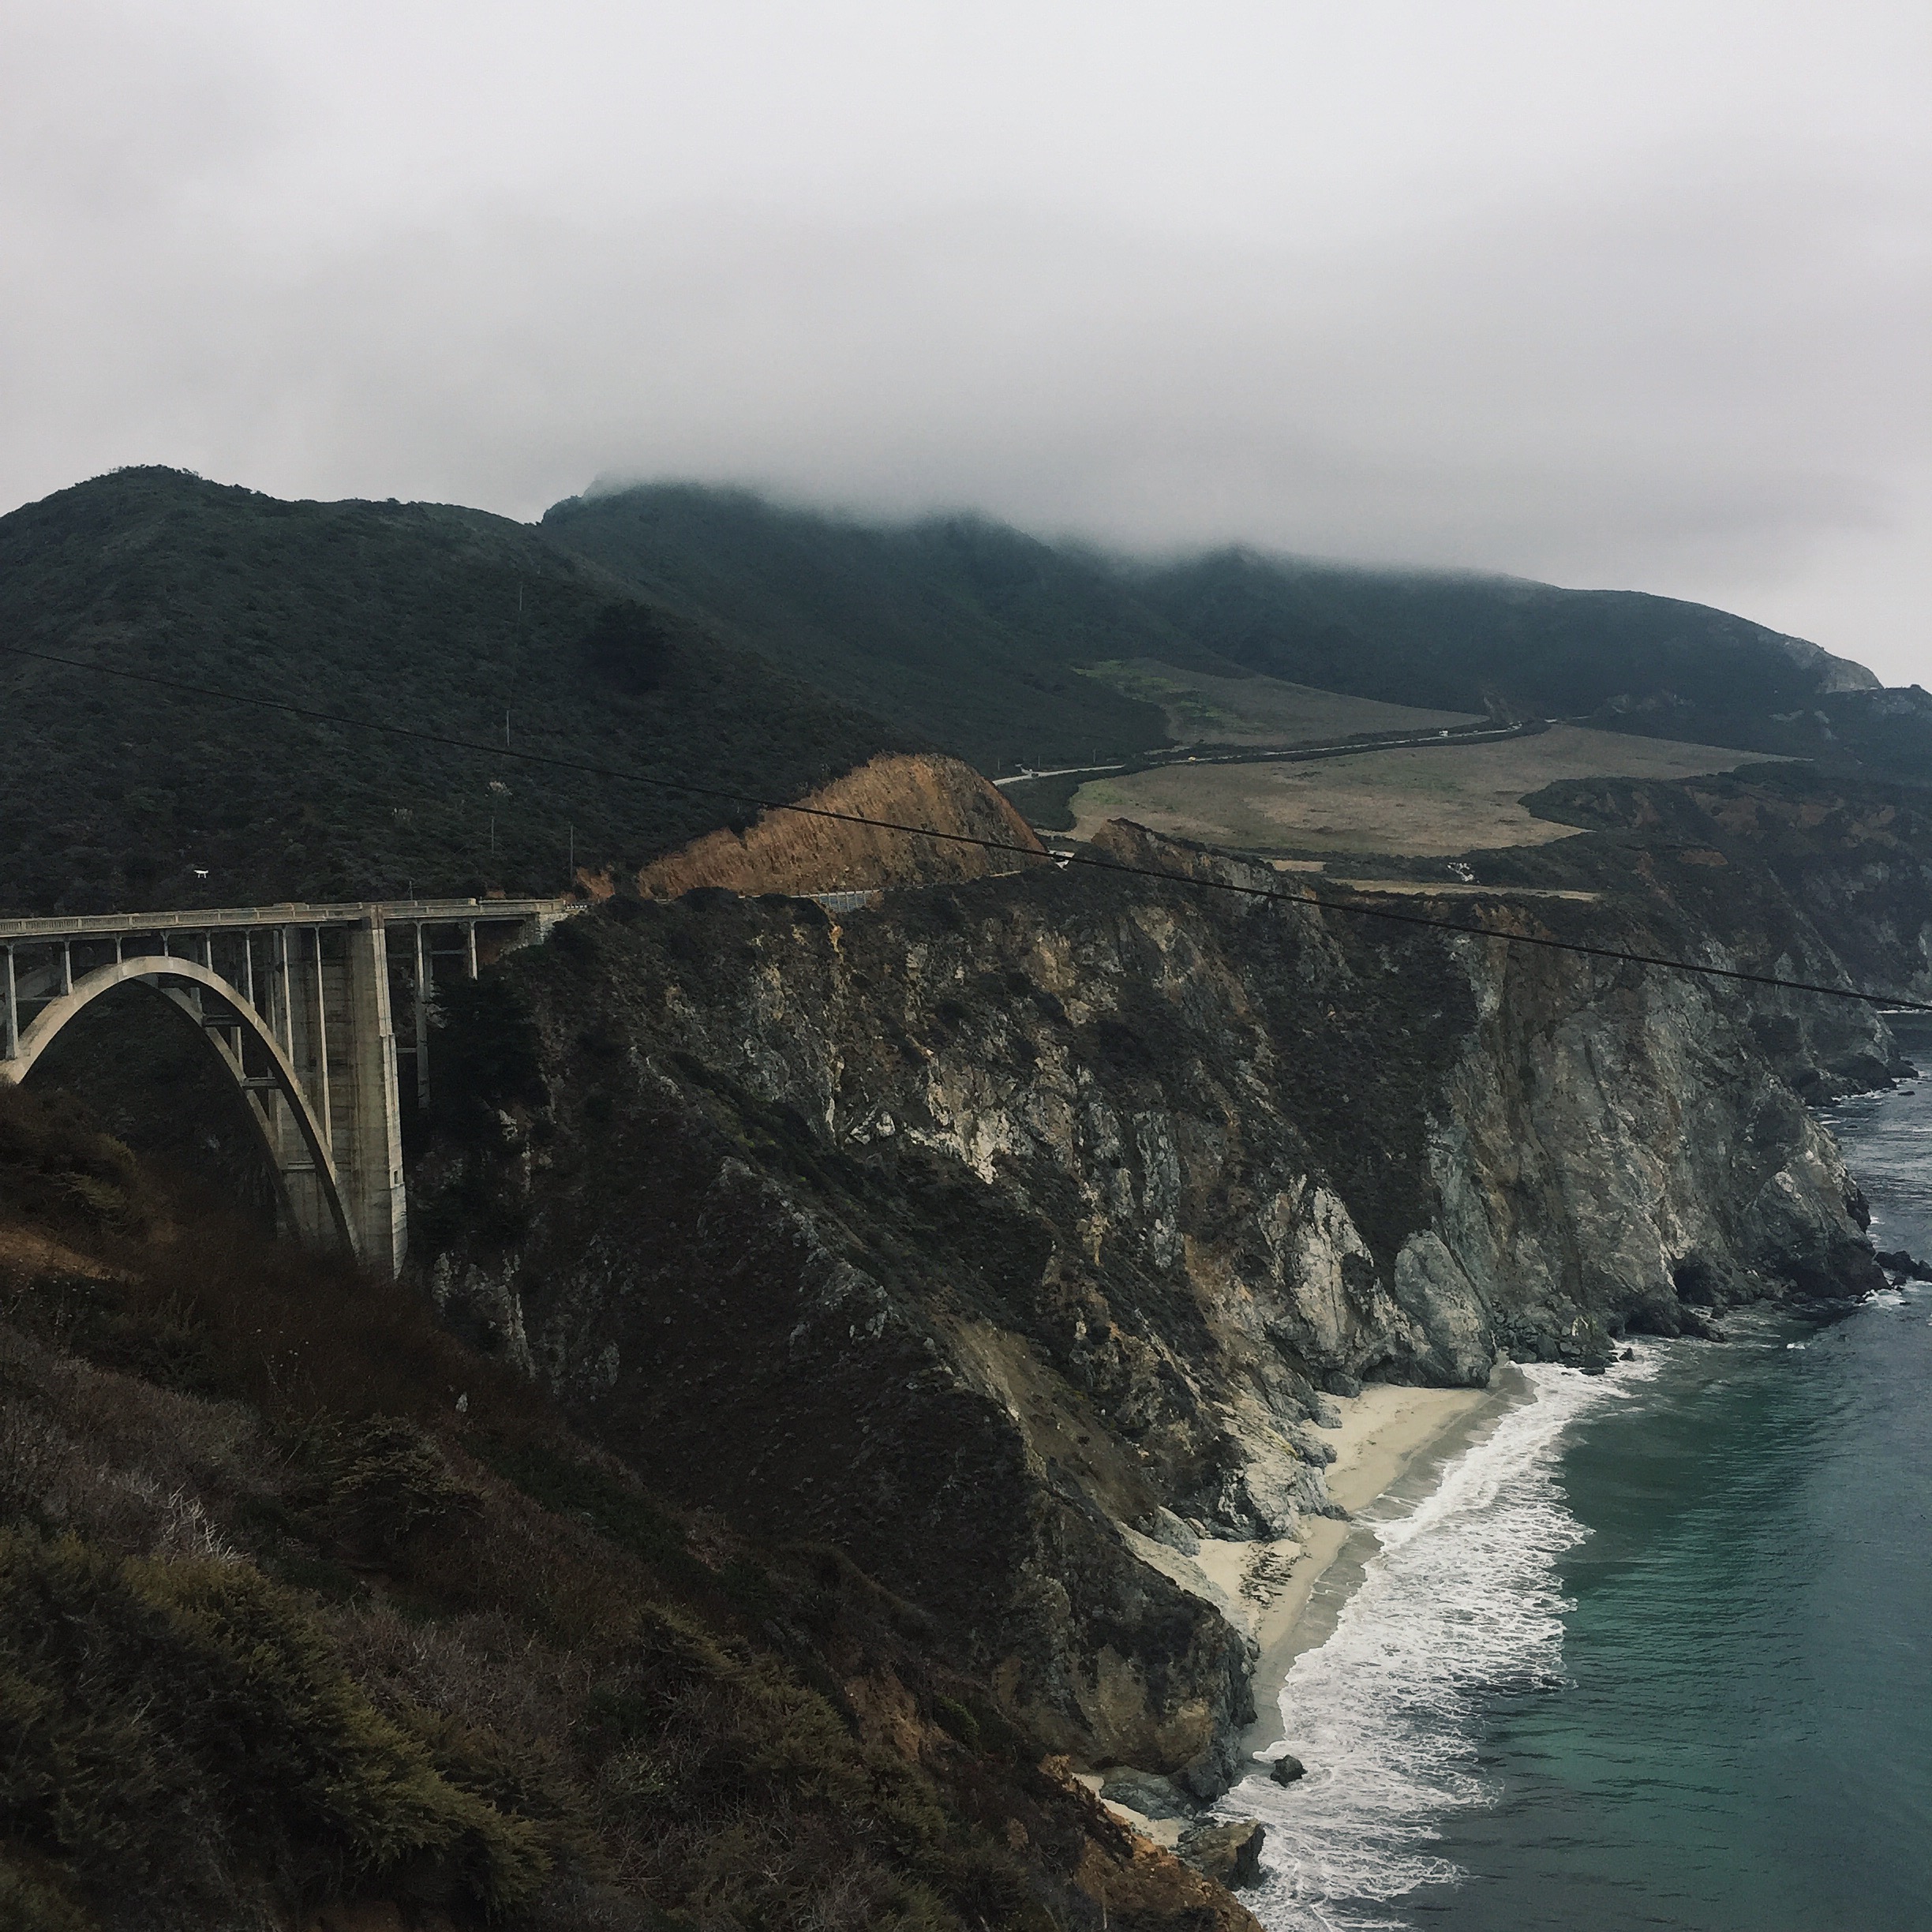 Los Angeles to San Francisco – Pacific coast highway road trip itinerary